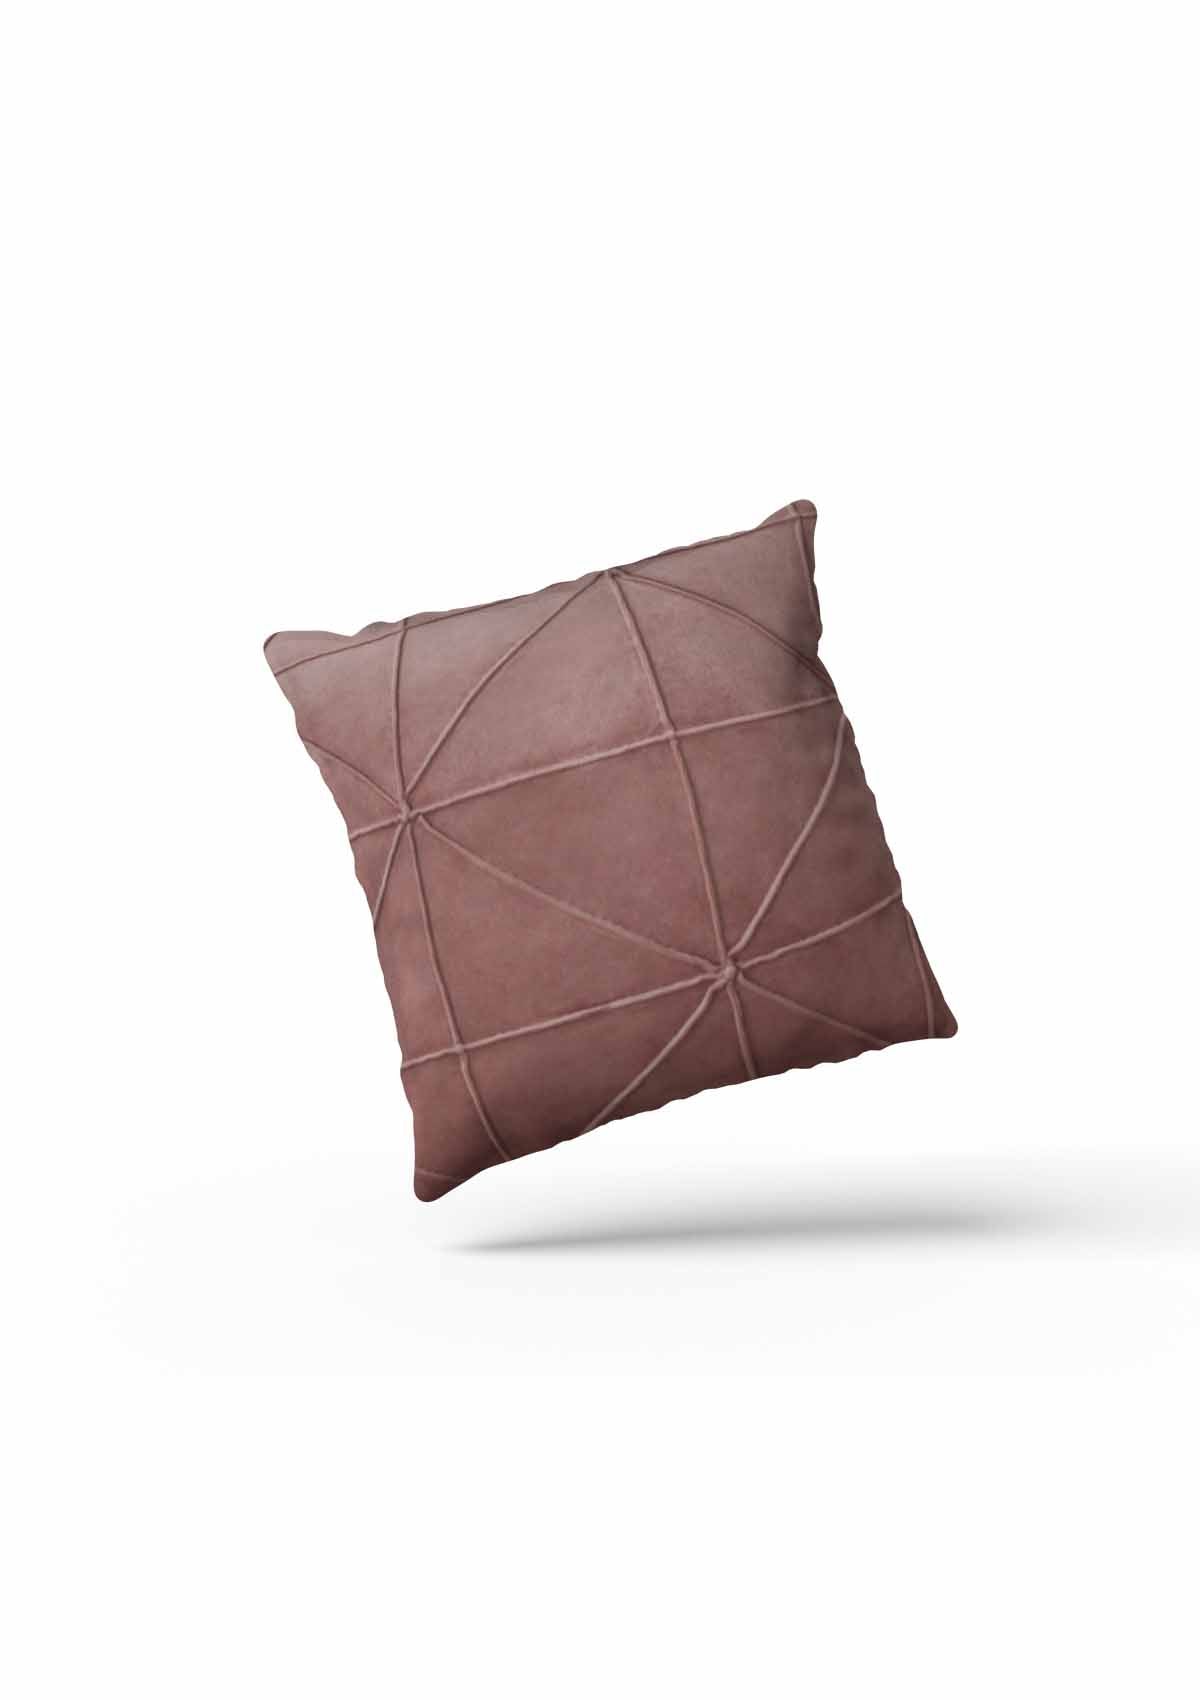 Coral Velvet Oasis Cushion Cover | CovermyCushion